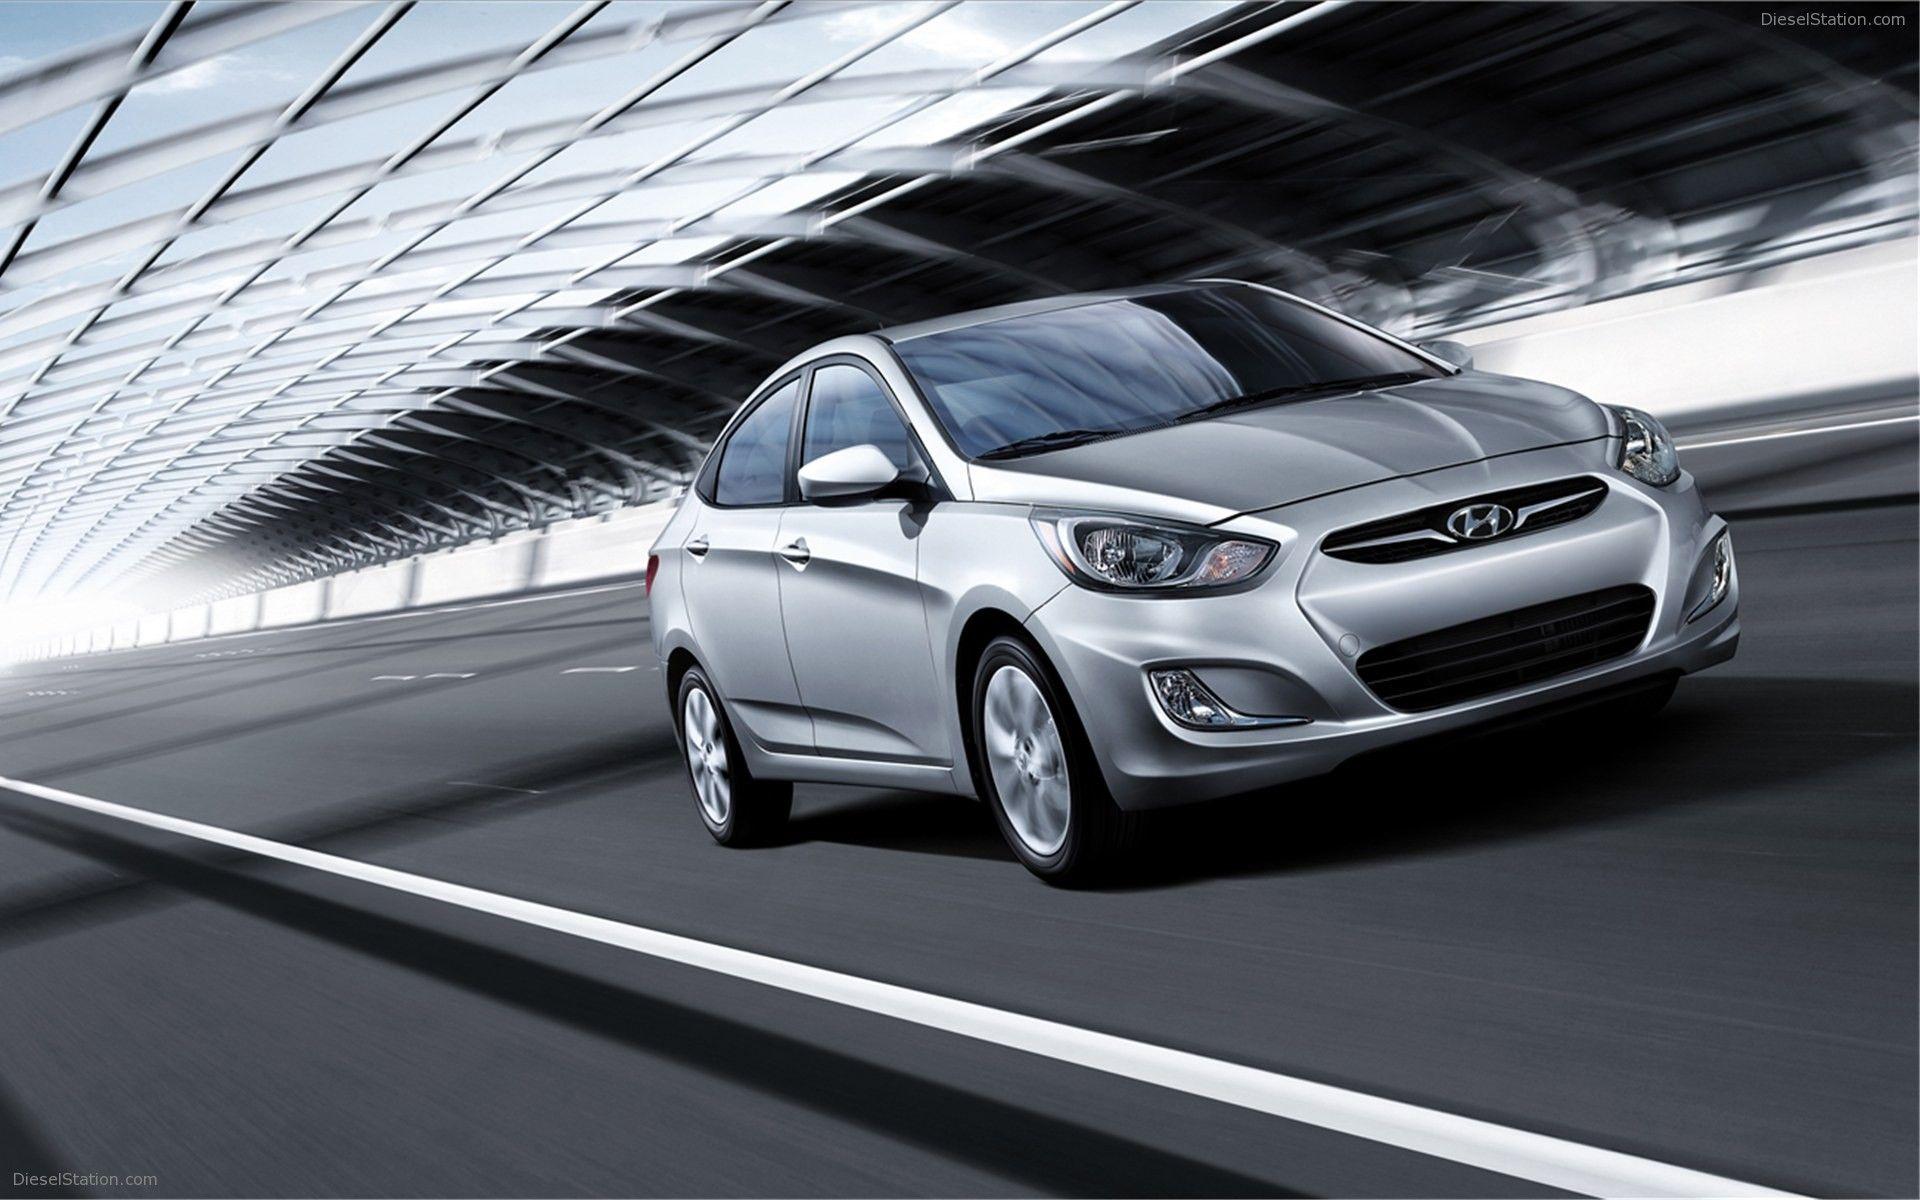 Hyundai Accent Wallpaper HD Photo, Wallpaper and other Image